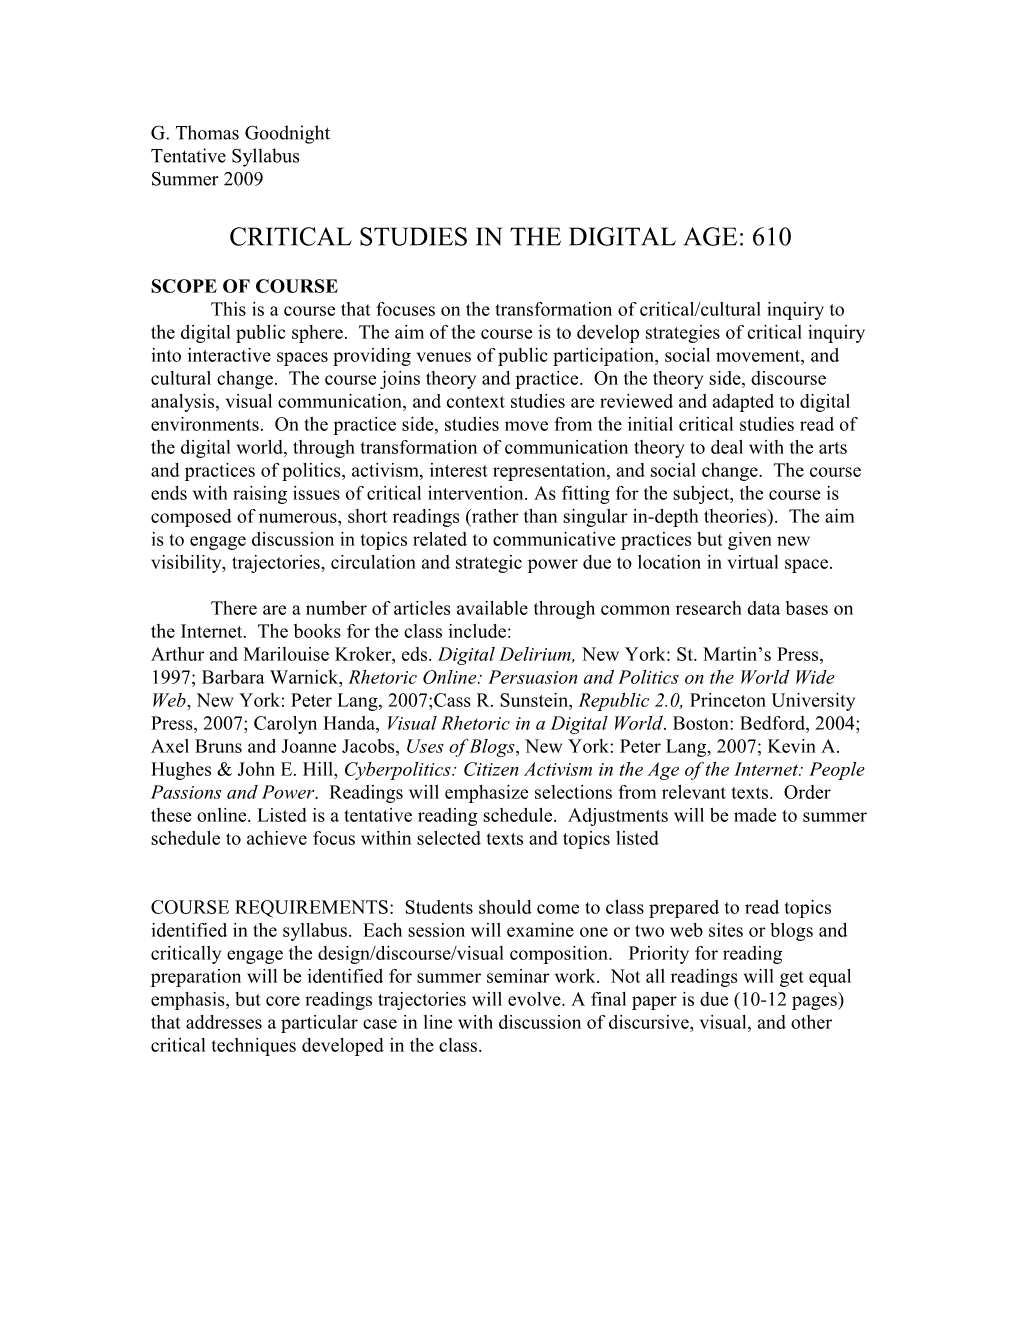 Critical Studies in the Digital Age: 610